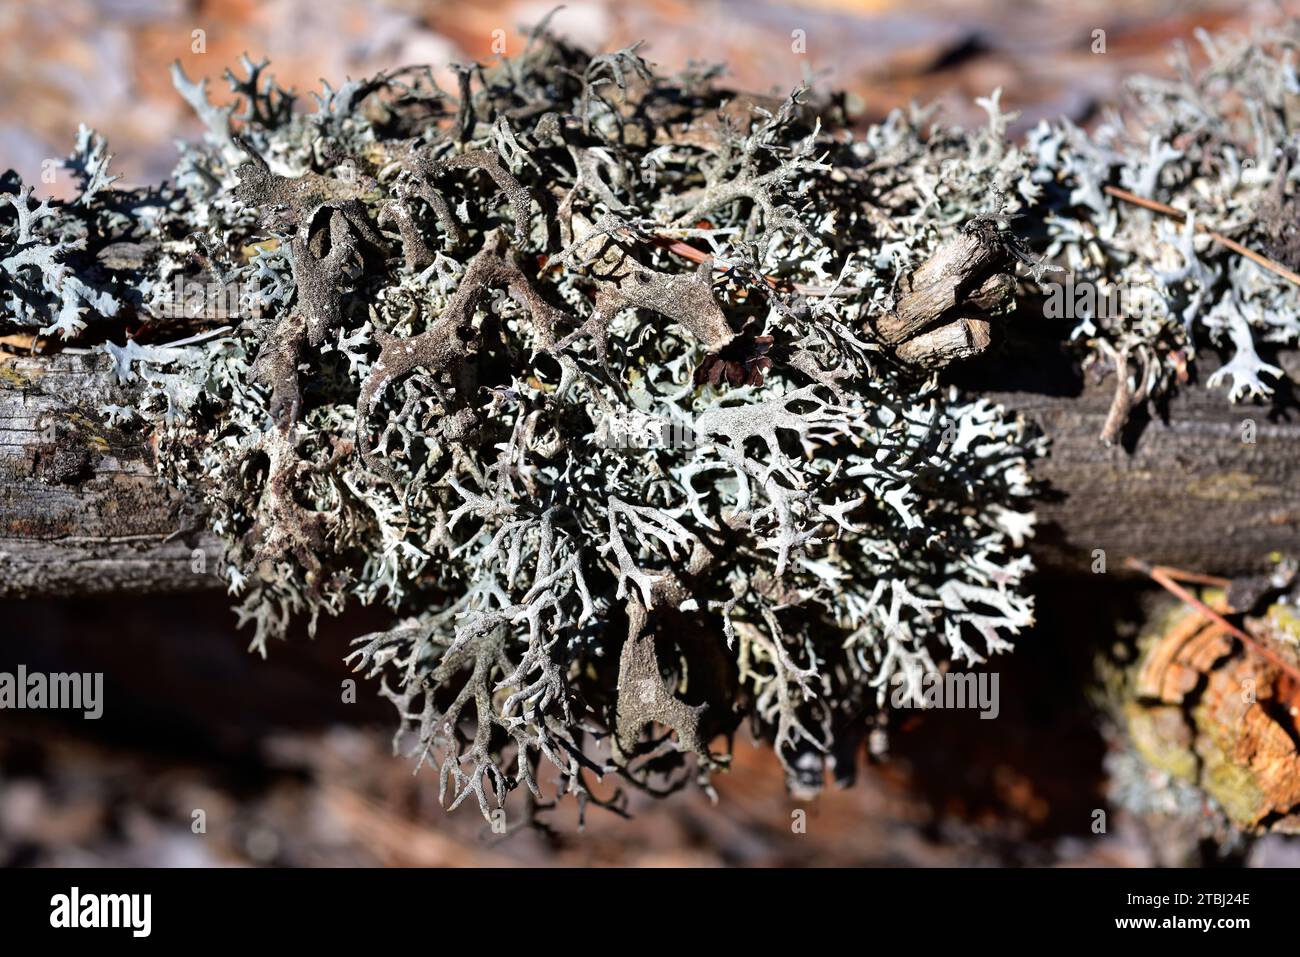 Tree moss (Pseudevernia furfuracea) is a fruticulose lichen that grows on bark trees (pines and firs). Is used on perfume industry. This photo was tak Stock Photo